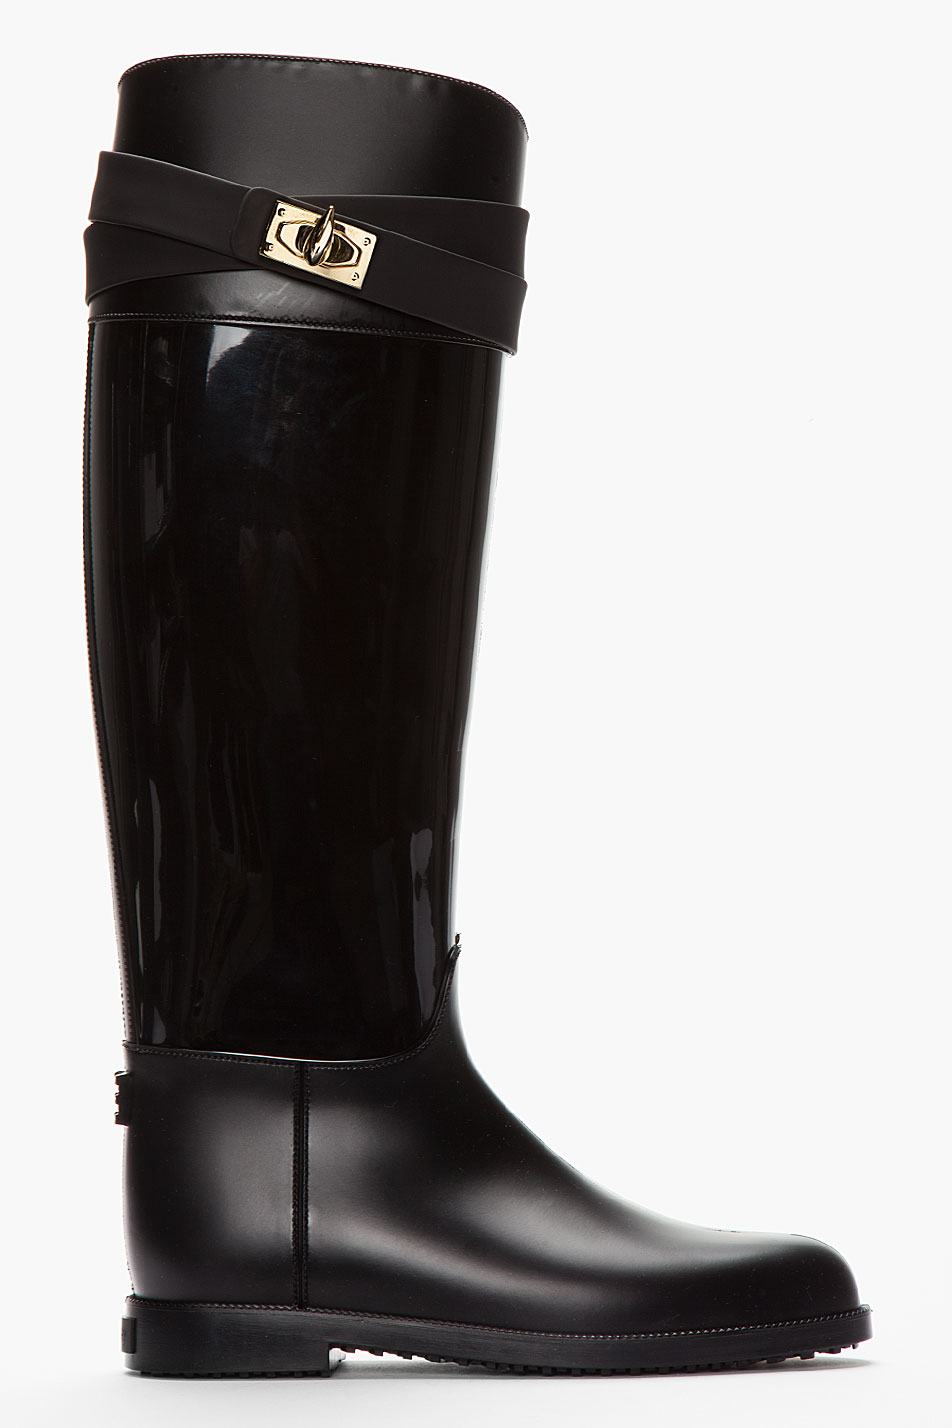 Givenchy Black Matte and Patent Rubber Sharklock Rain Boots in ...